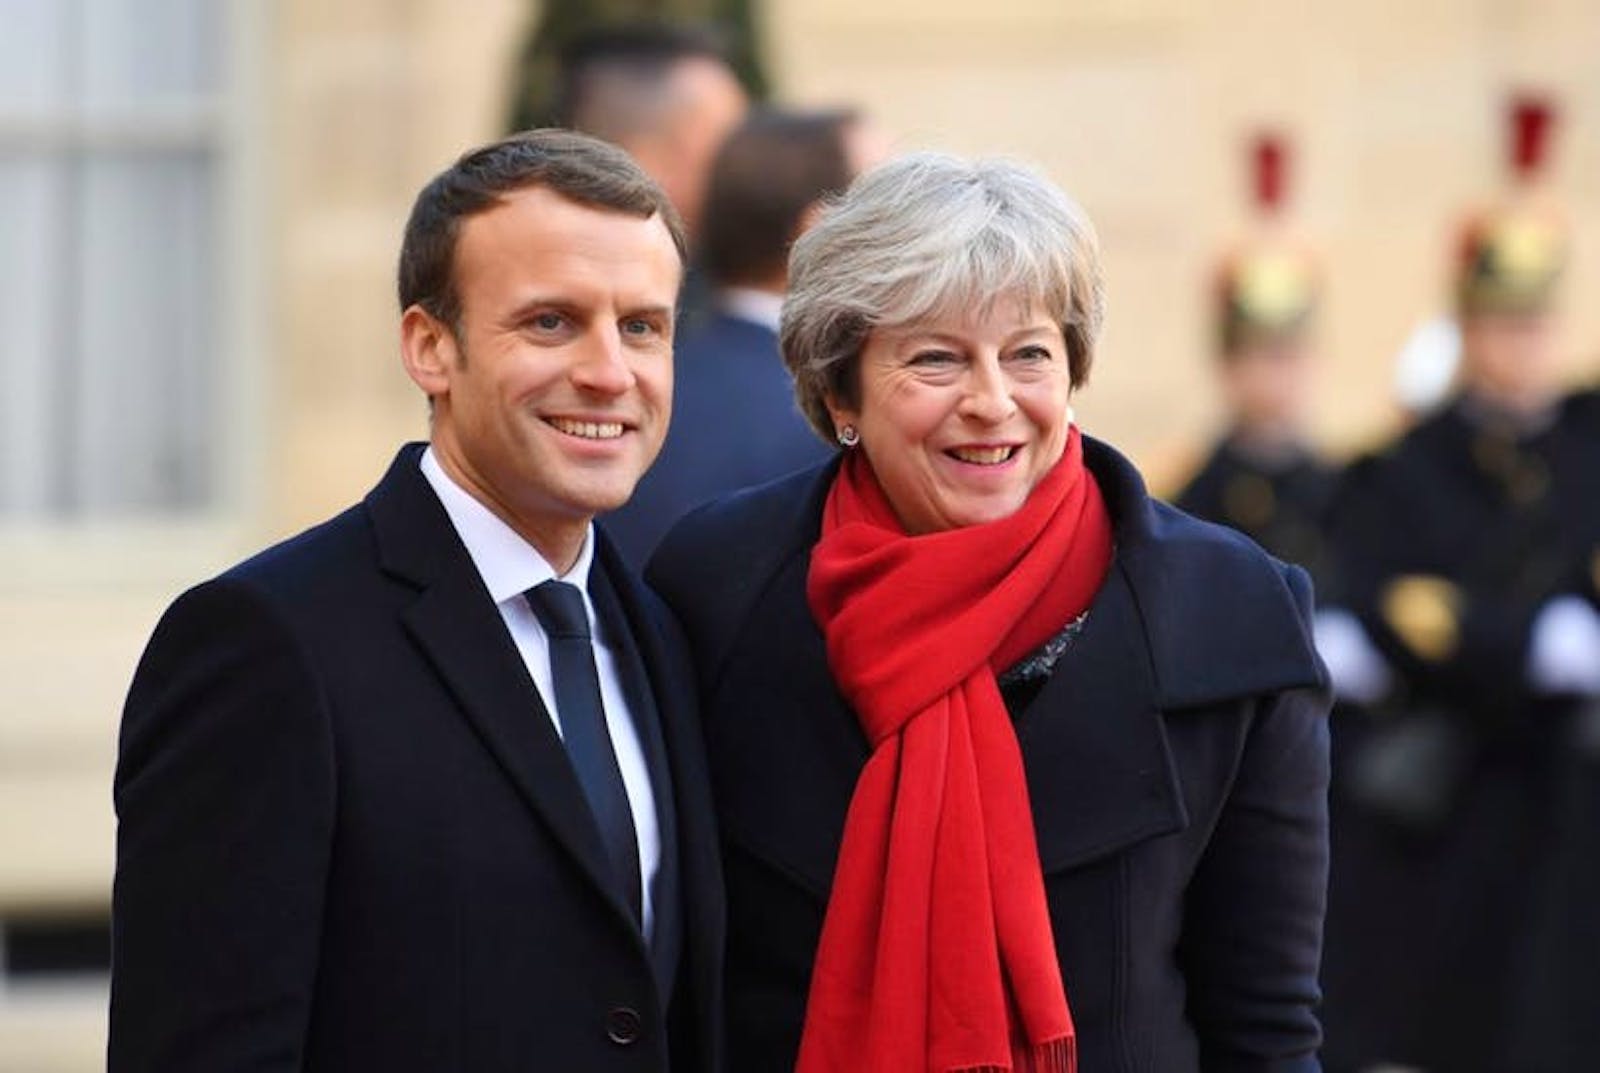 French President Emmanuel Macron and UK Prime Minister Theresa May